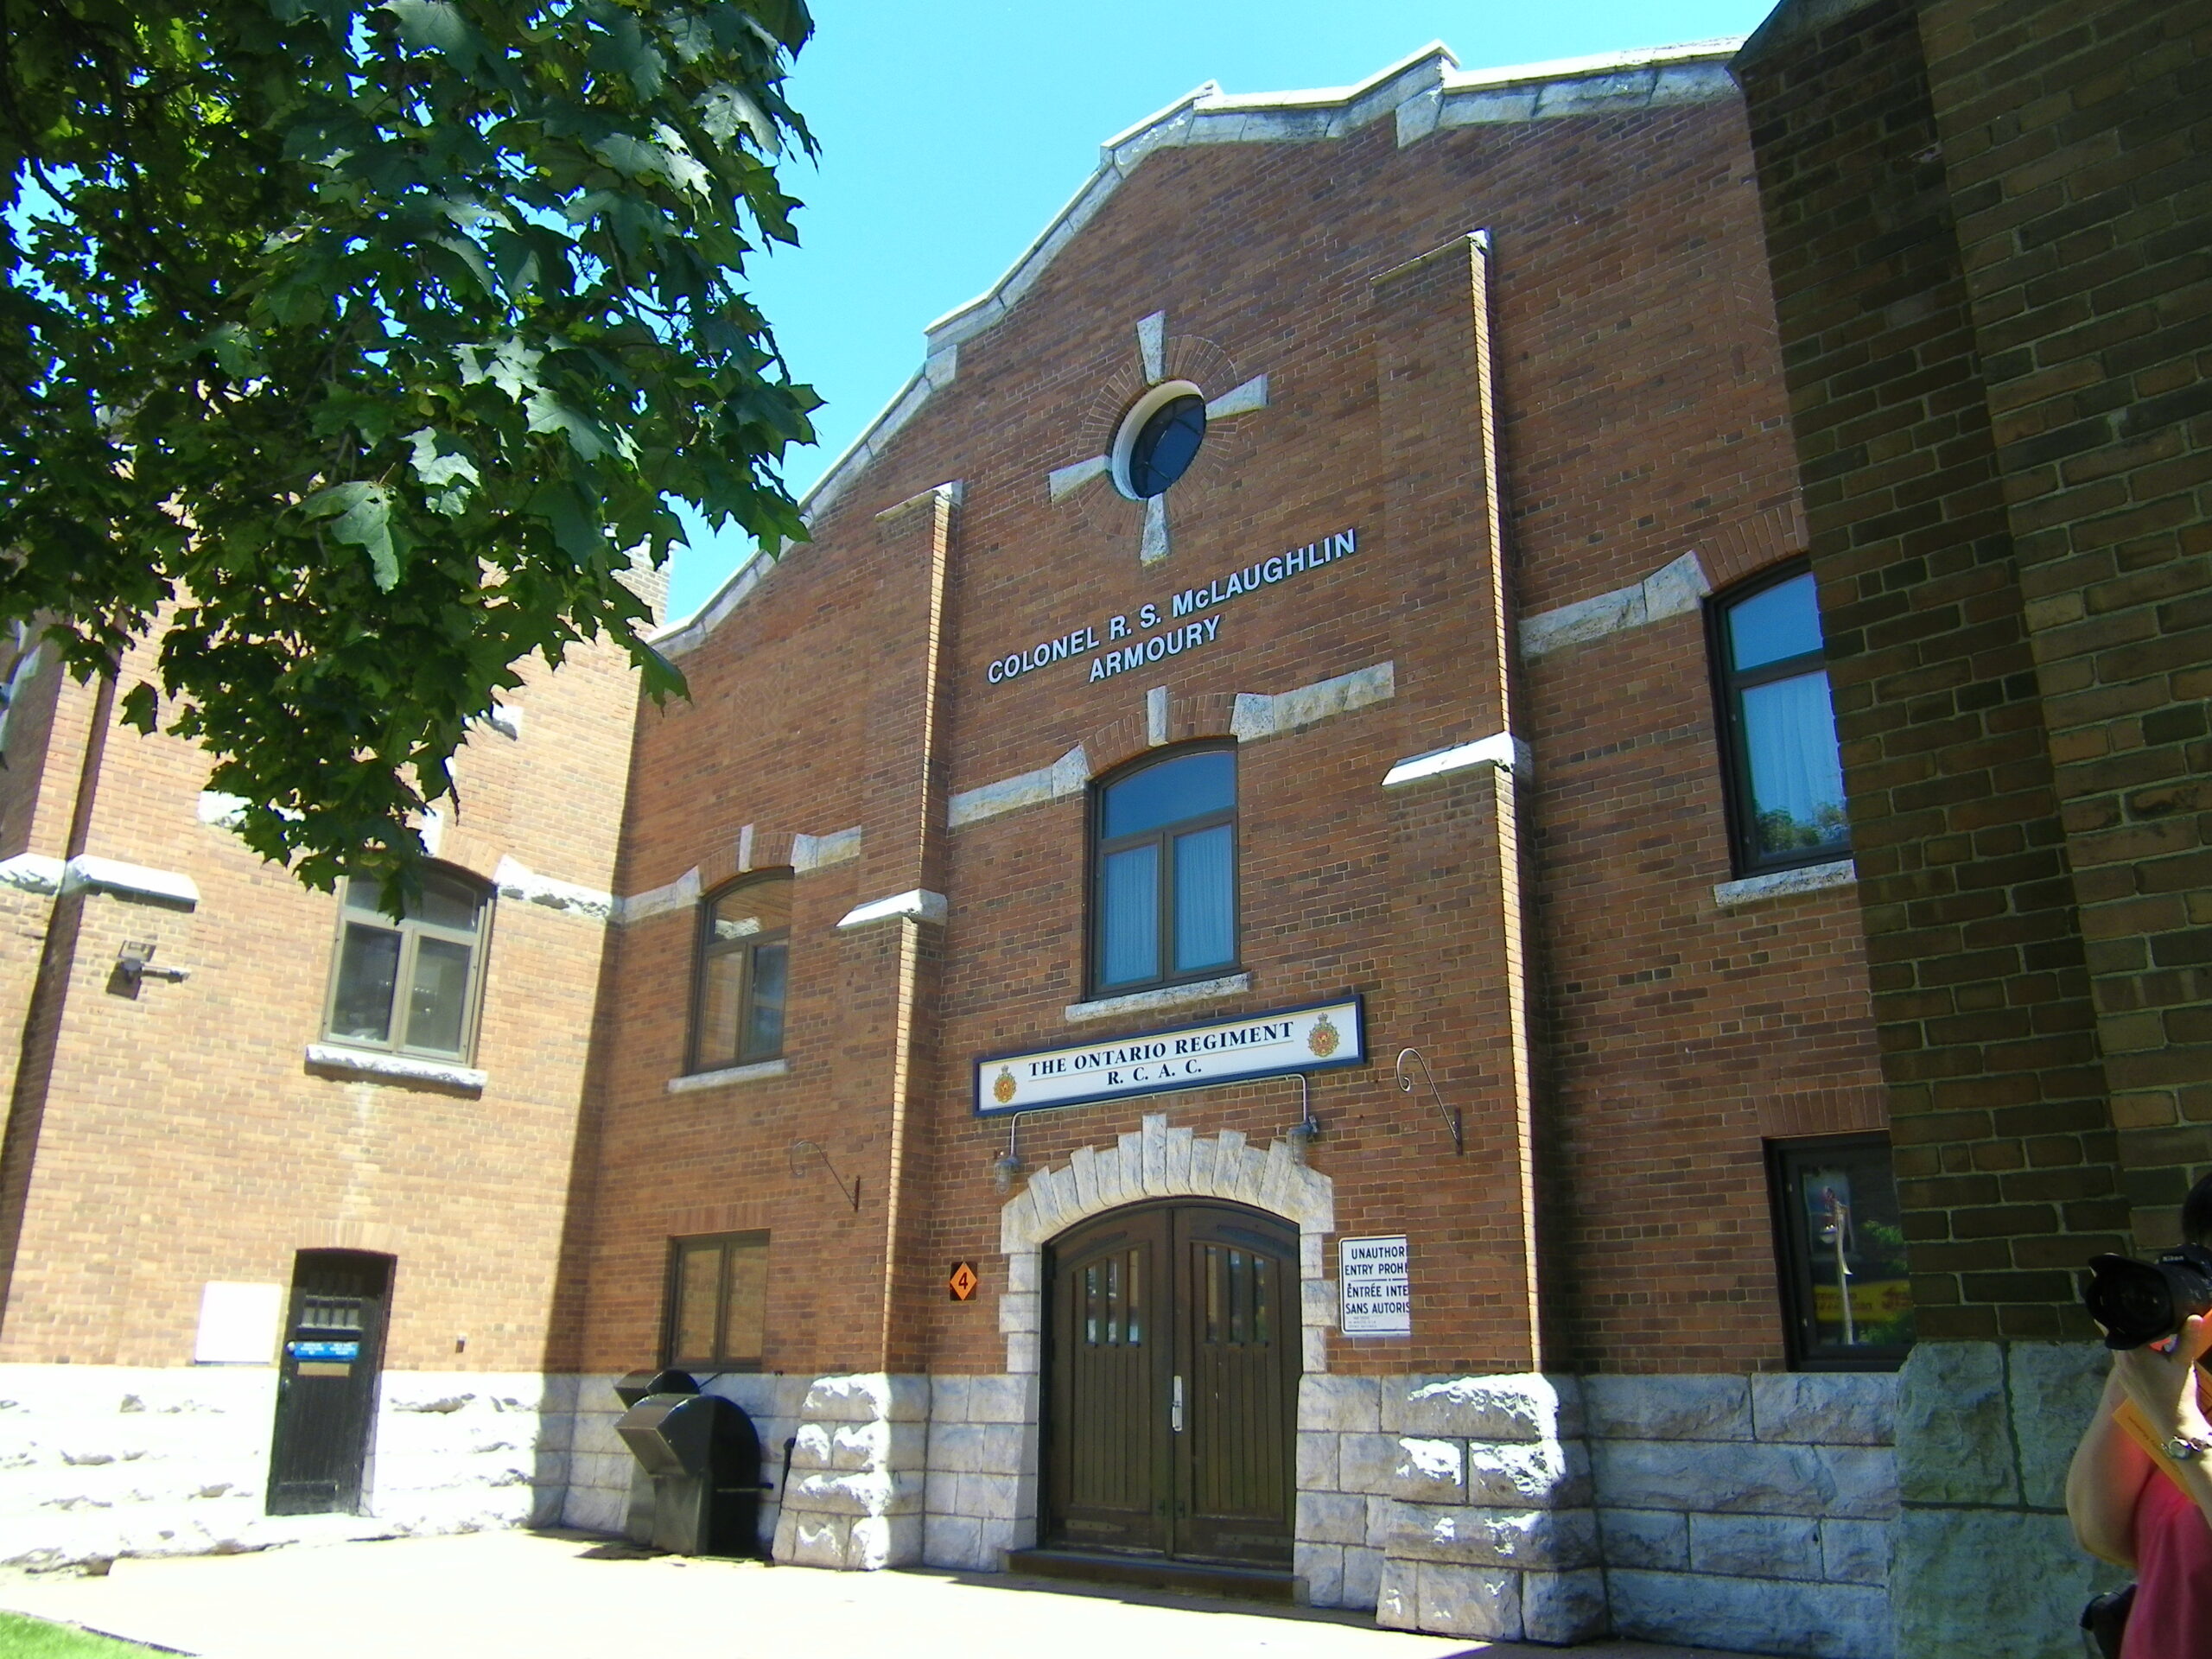 The entrance to the Col R.S. McLaughlin Armoury on Simcoe Street N, the image was taken from southwest of the building around 10 meters from the entrance. one of the two square towers attached to the building's entrance is covered from the camera view by a tree on the left side of the image.